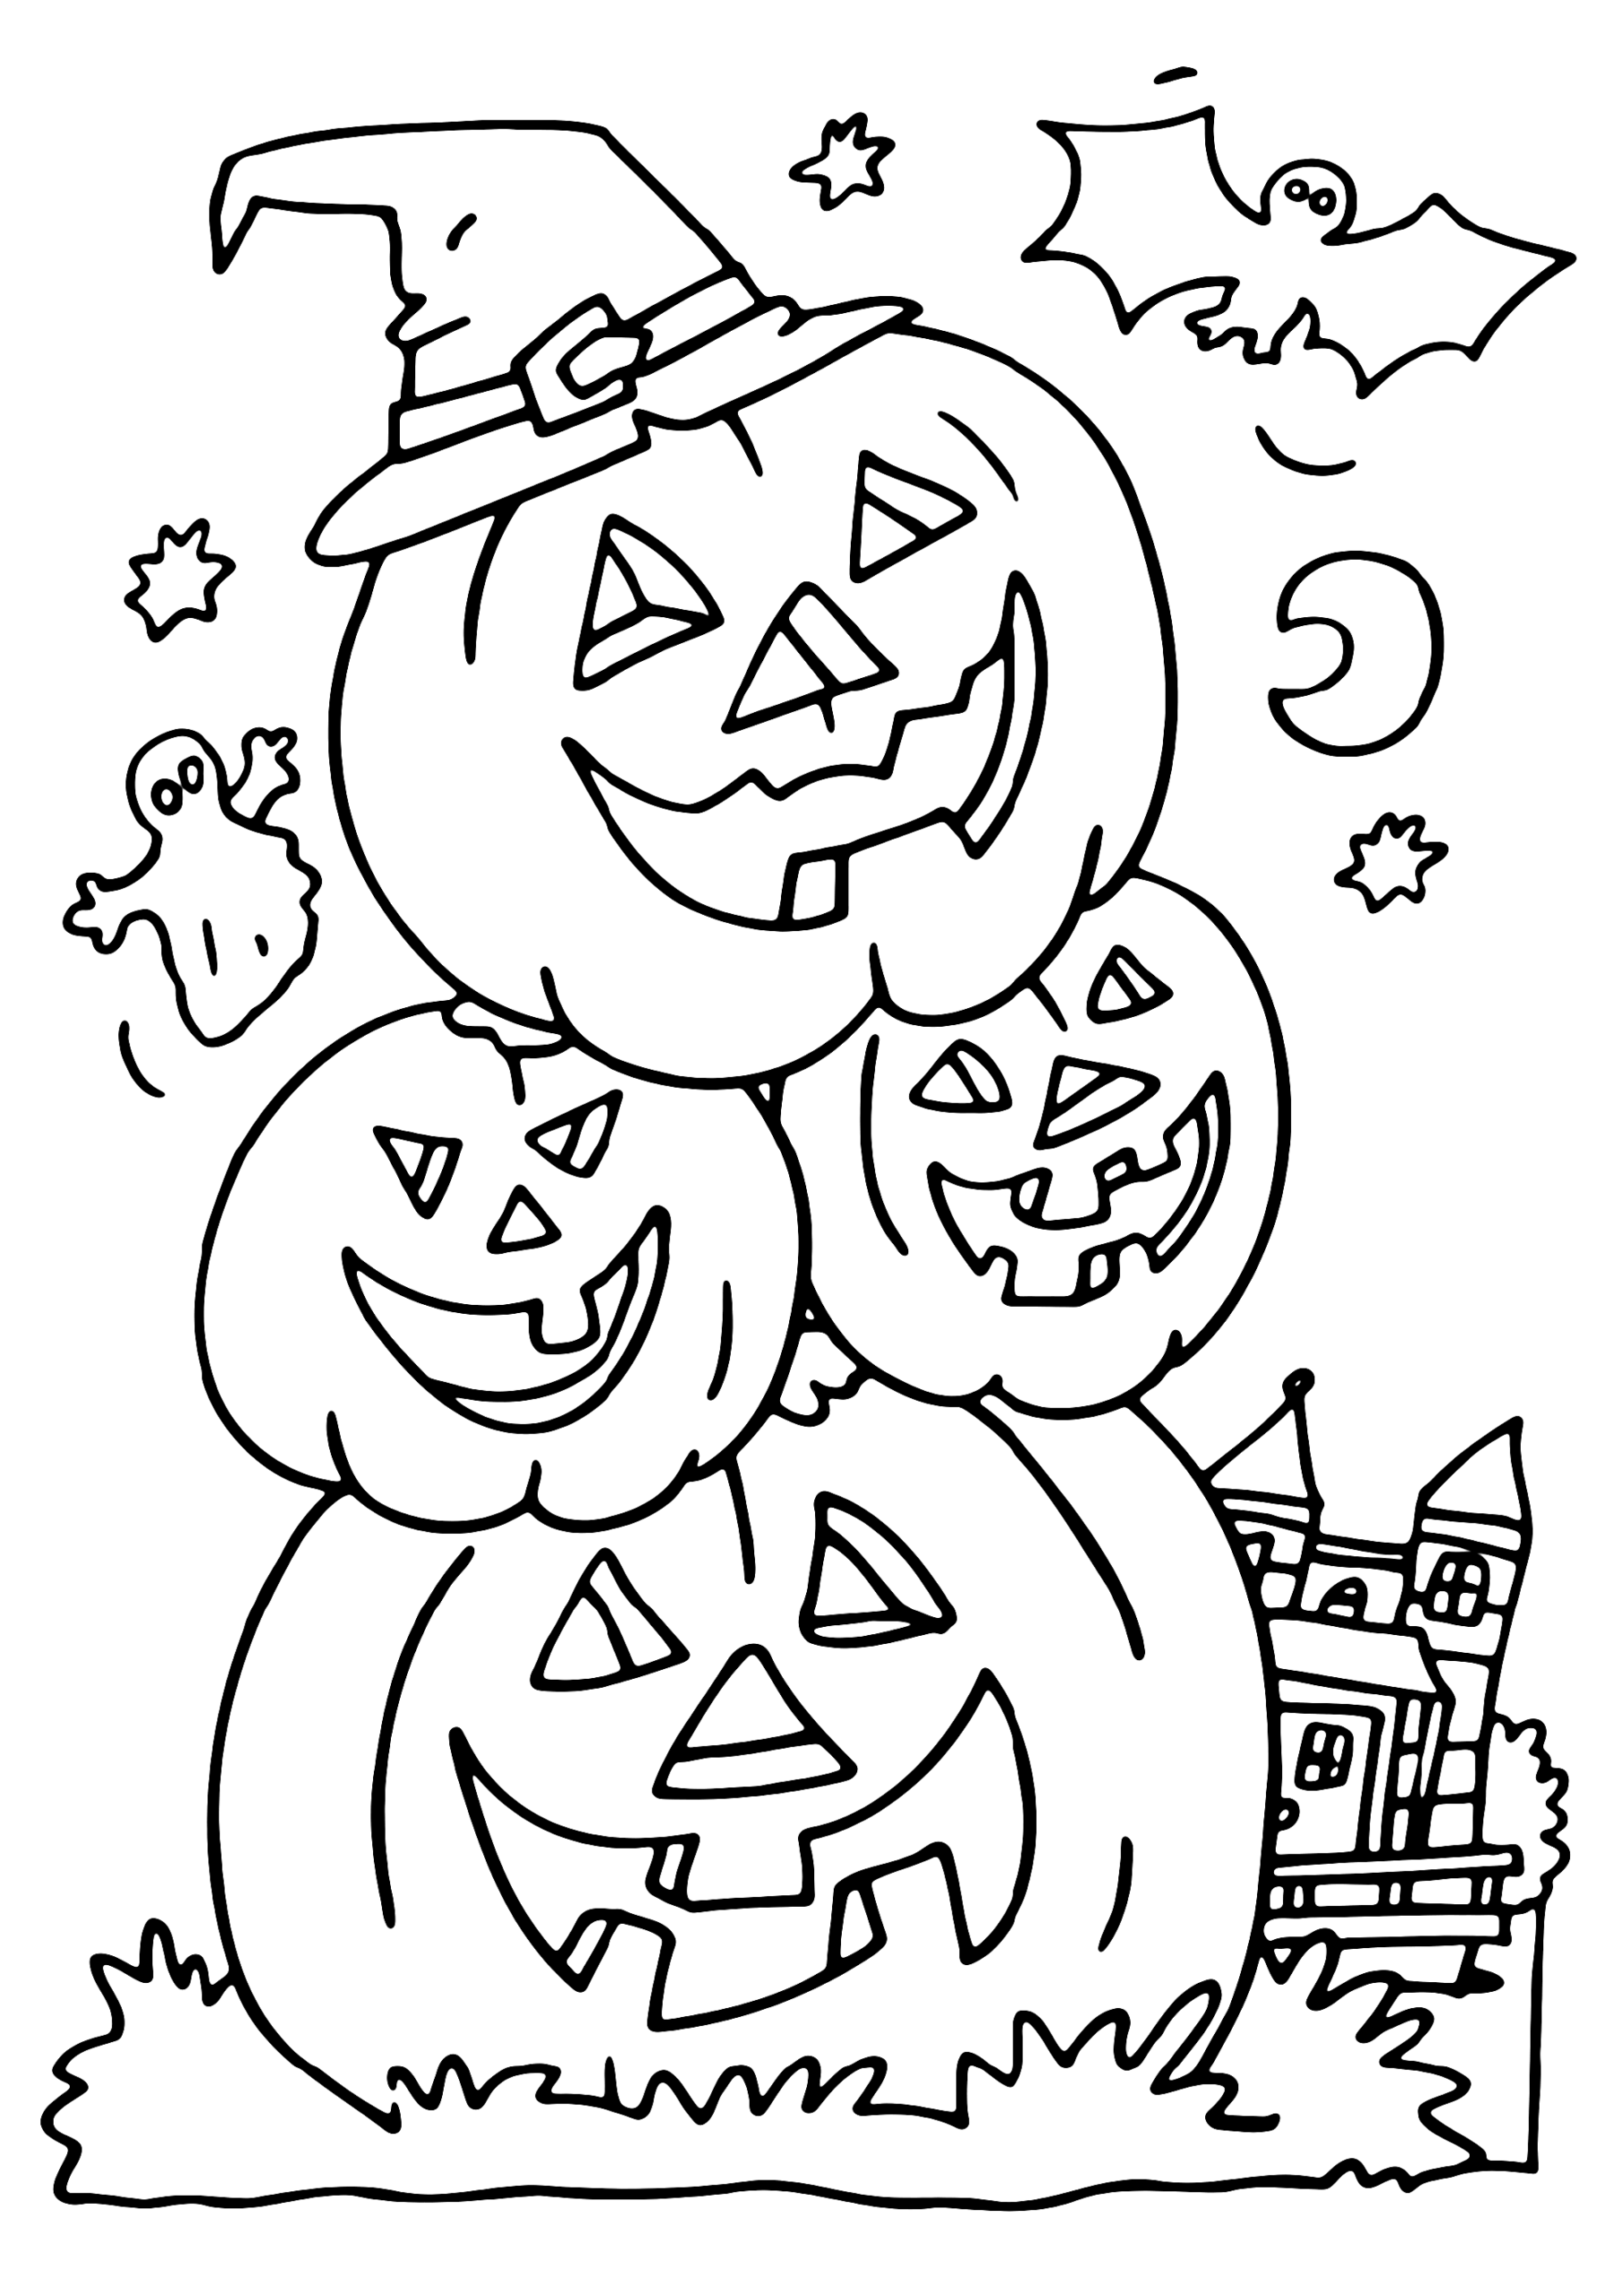 Spooky and Funny Stacked Halloween Pumpkin Coloring Page for Kids